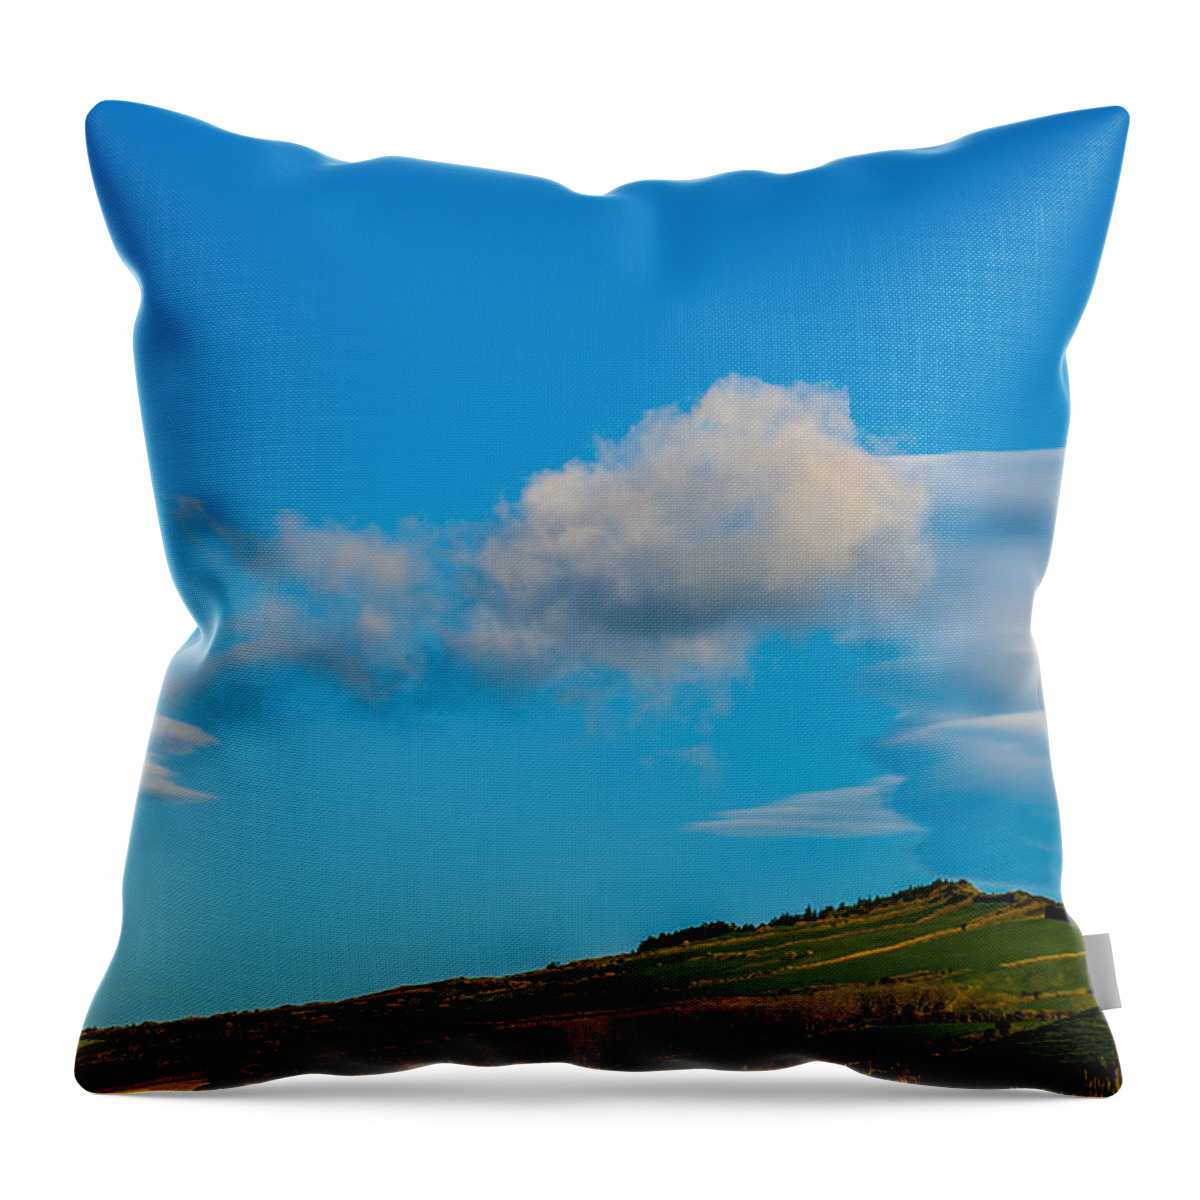 Above Throw Pillow featuring the photograph White Clouds Form Tornado by Joseph Amaral